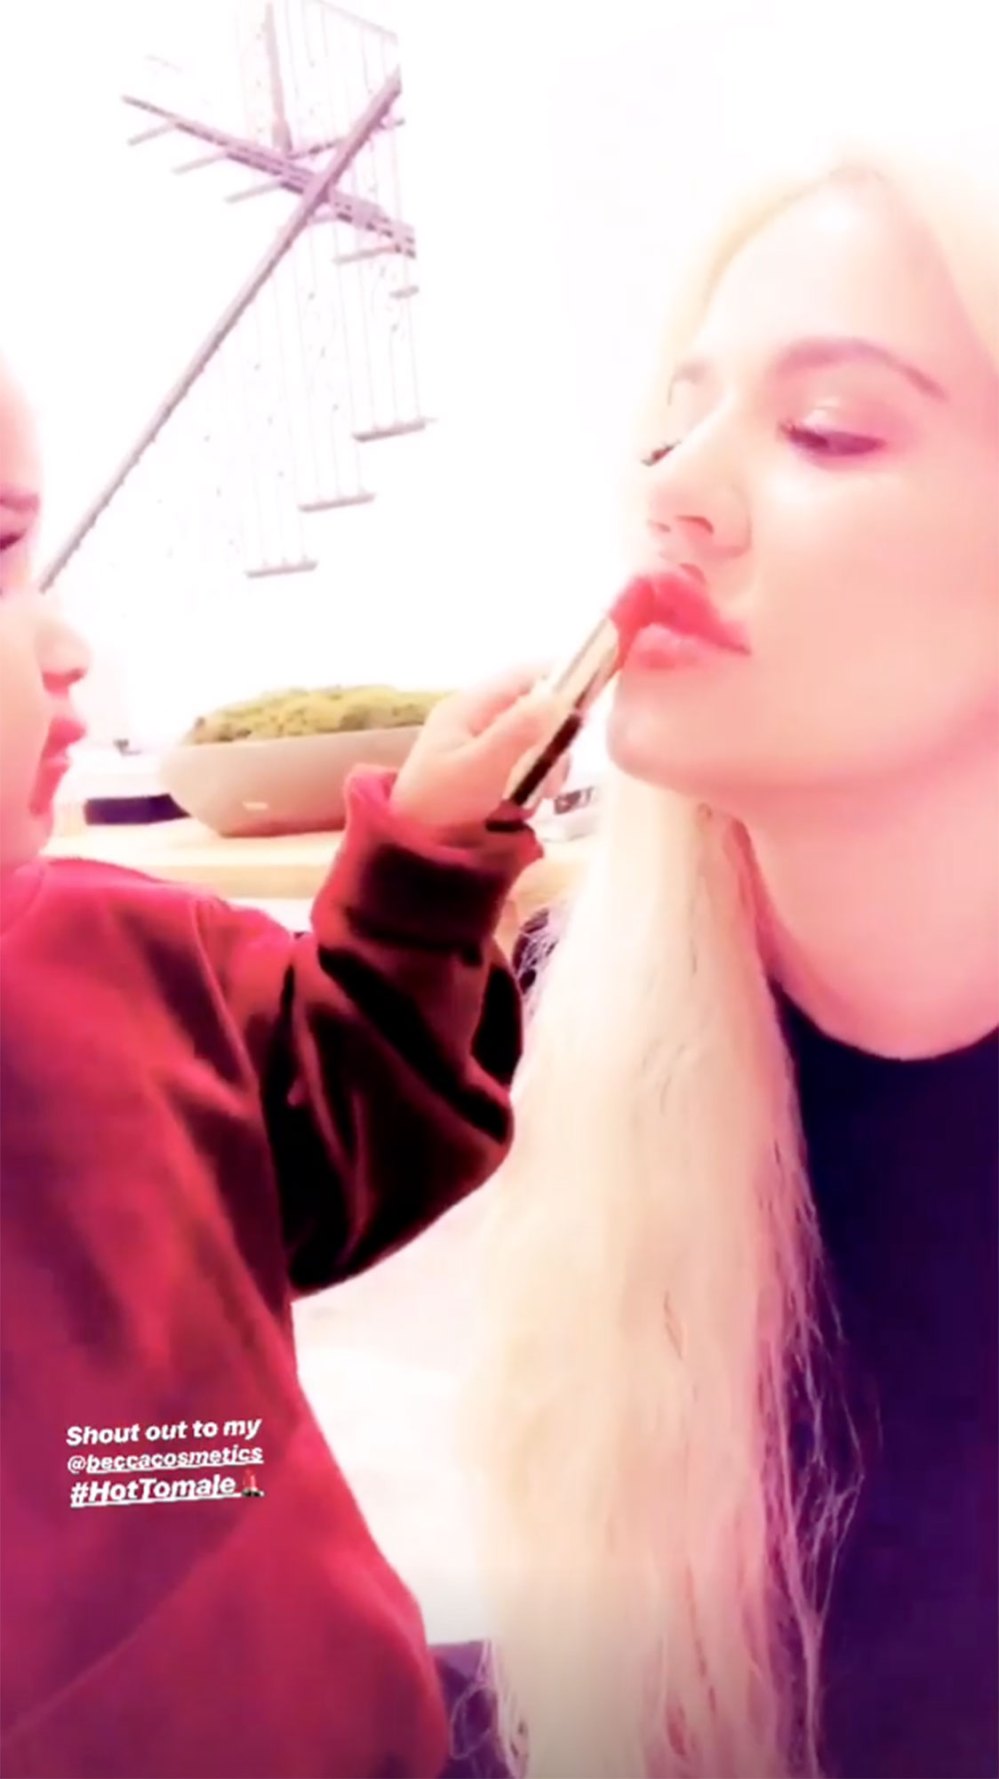 Dream Renee Khloe Kardashian’s New Makeup Artist Is Pint-Sized and Adorable